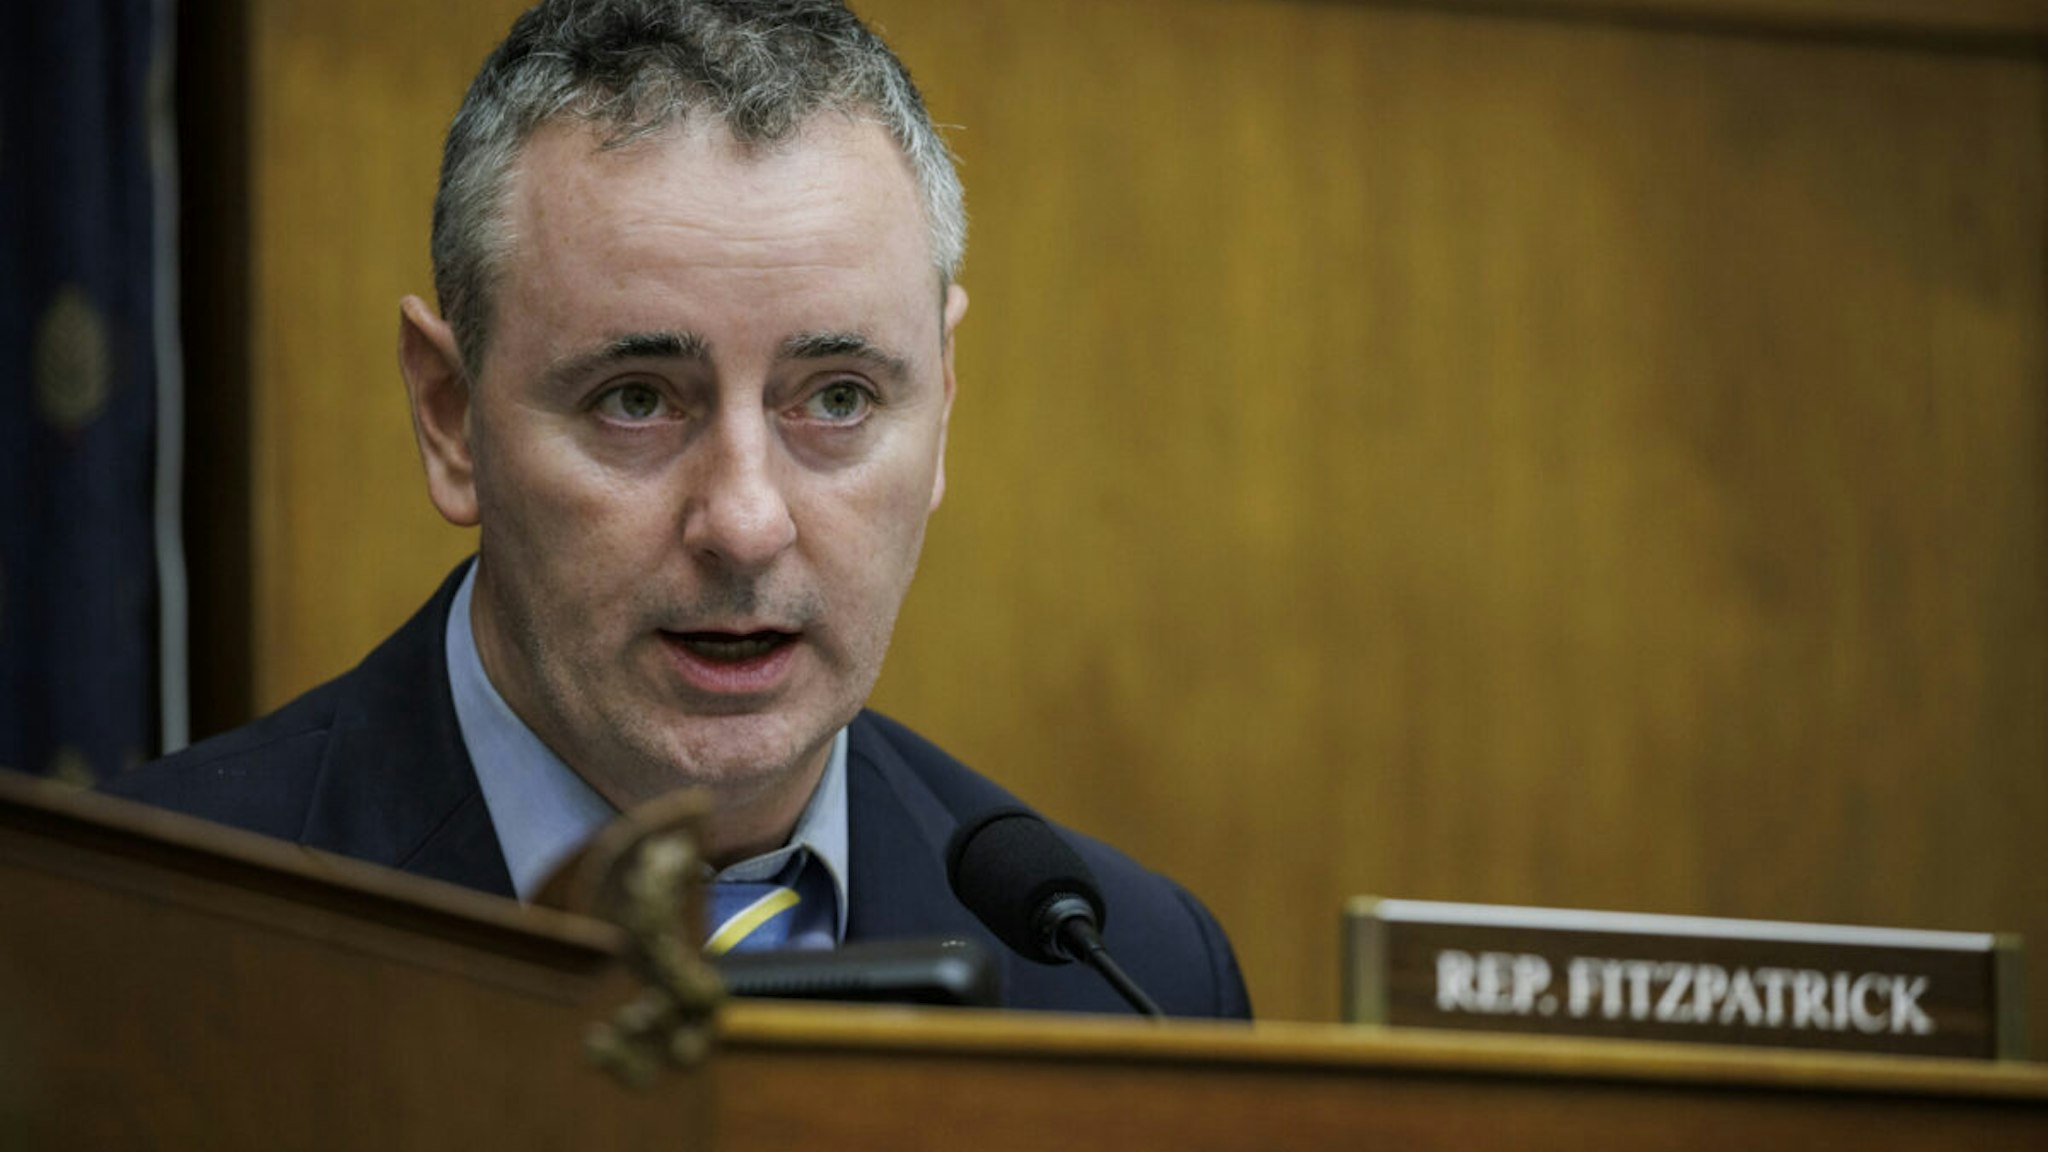 Subcommittee Ranking Member Brian Fitzpatrick (R-PA) delivers his opening statement during a U.S. House Foreign Affairs Subcommittee during a hearing on Capitol Hill on September 21, 2022 in Washington, DC.